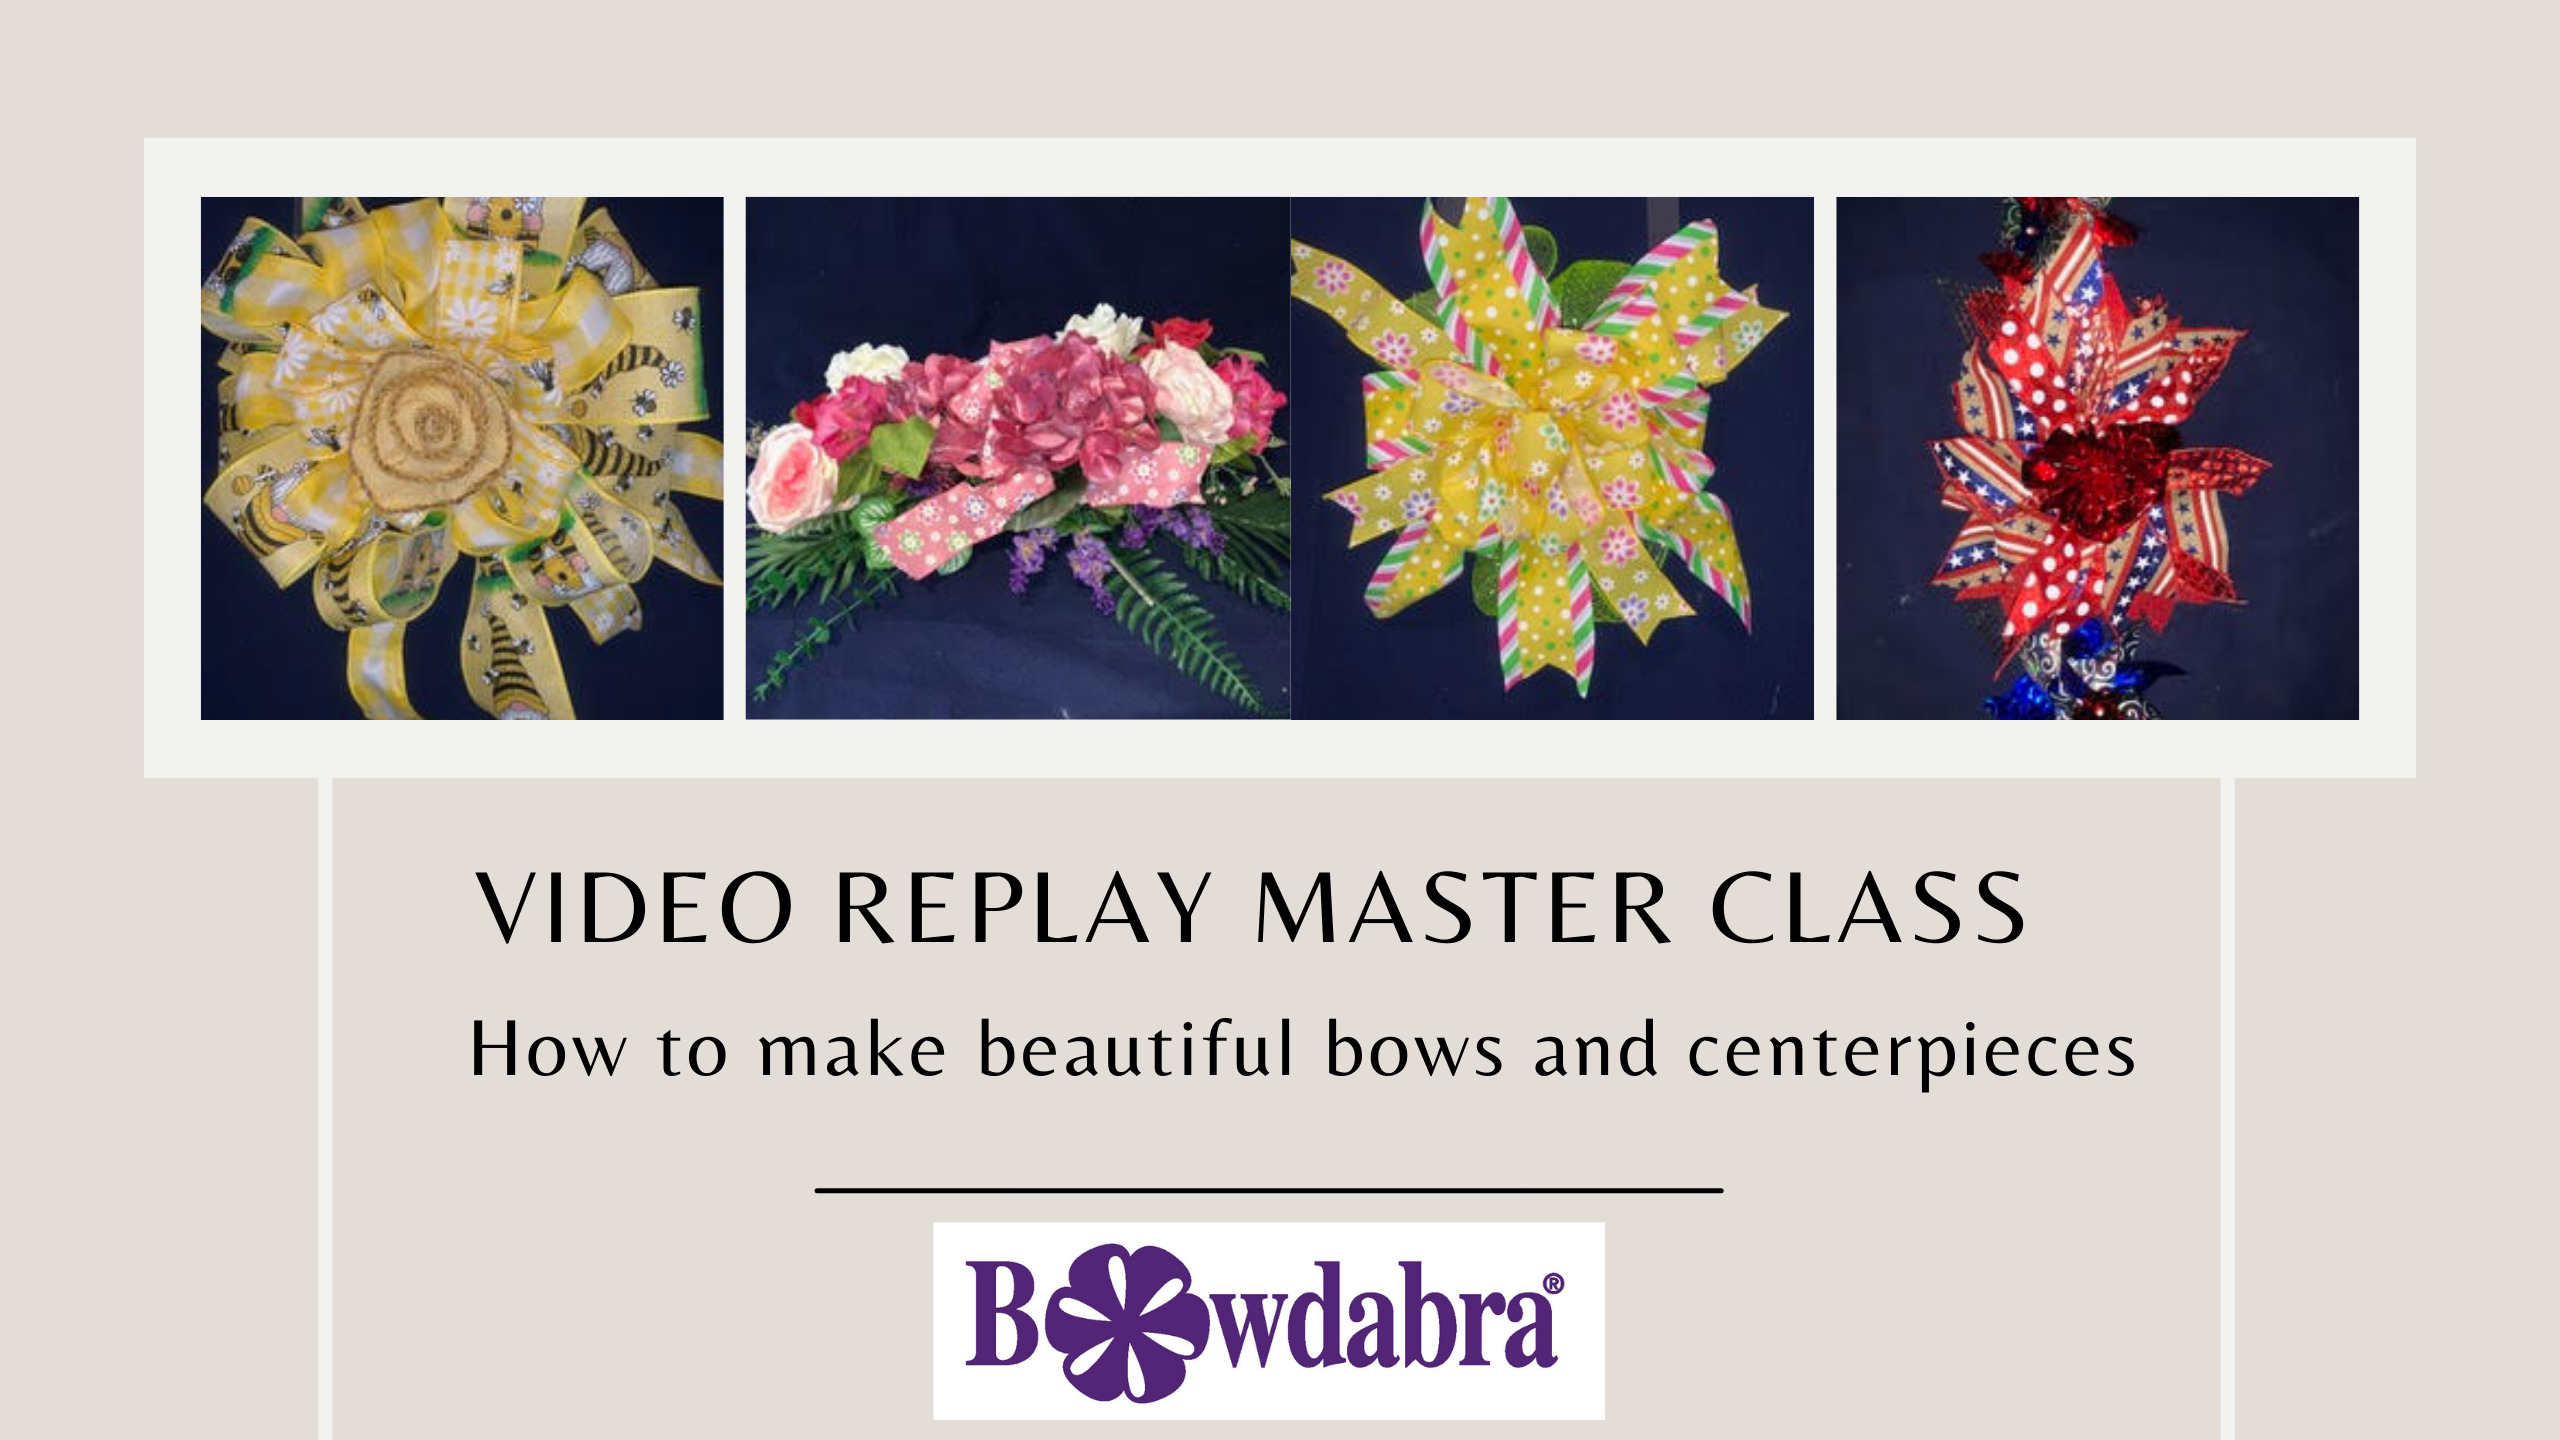 So do you want to make beautiful boutique hair bows? Bowdabra bow maker  helps you make all sorts of ha…